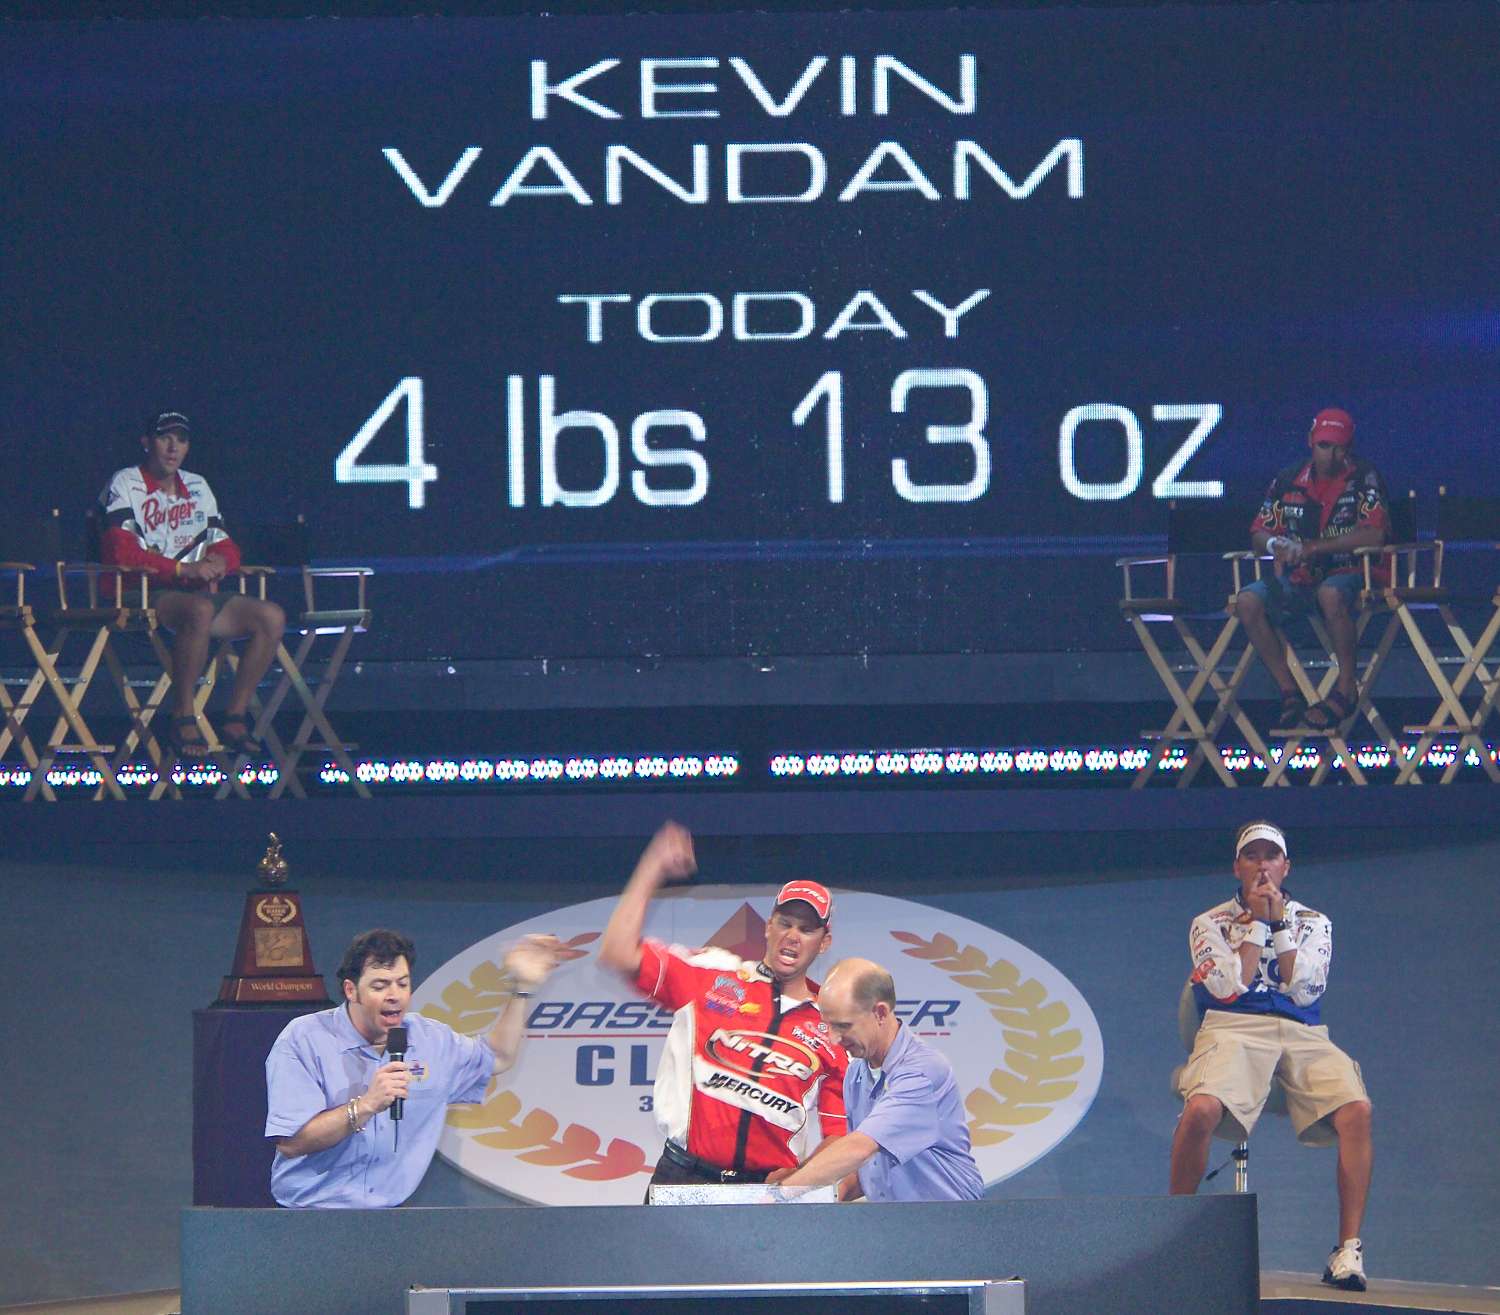 Lightest Winning Weight in a Classic: Kevin VanDam, 12-15
It's not often one gets to celebrate catching less than 5 pounds a day in a tournament. However, in the 2005 Bassmaster Classic, that's all it took to win. Kevin VanDam caught only 12 pounds, 15 ounces â and that was enough for a Classic victory by a 6-ounce margin over Aaron Martens. The three-day event took place on Three Rivers in Pittsburgh, Pa., in July 2005.